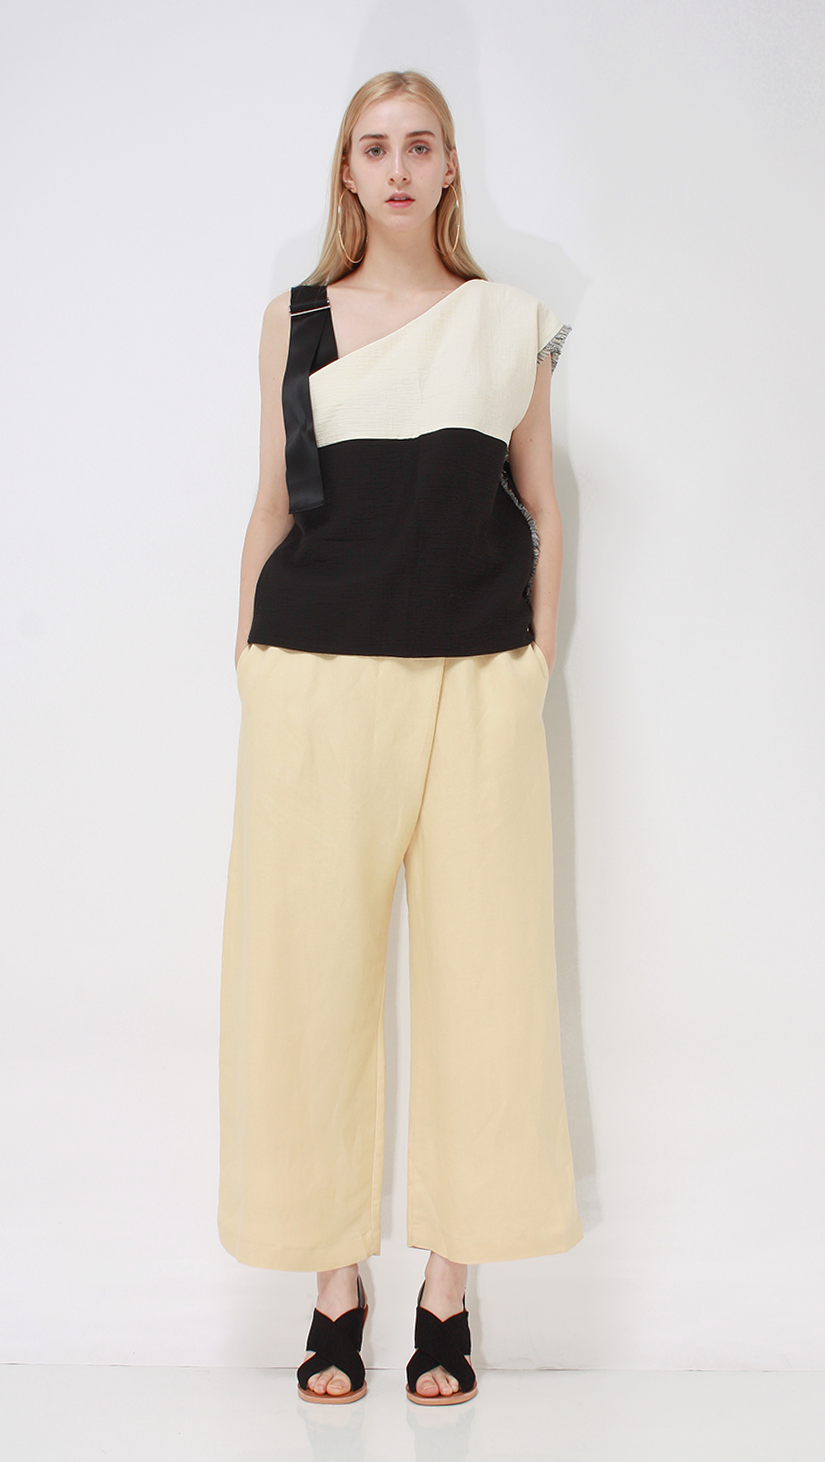 Francis Top, a lightweight one off-the-shoulder top in classic Cream/Black